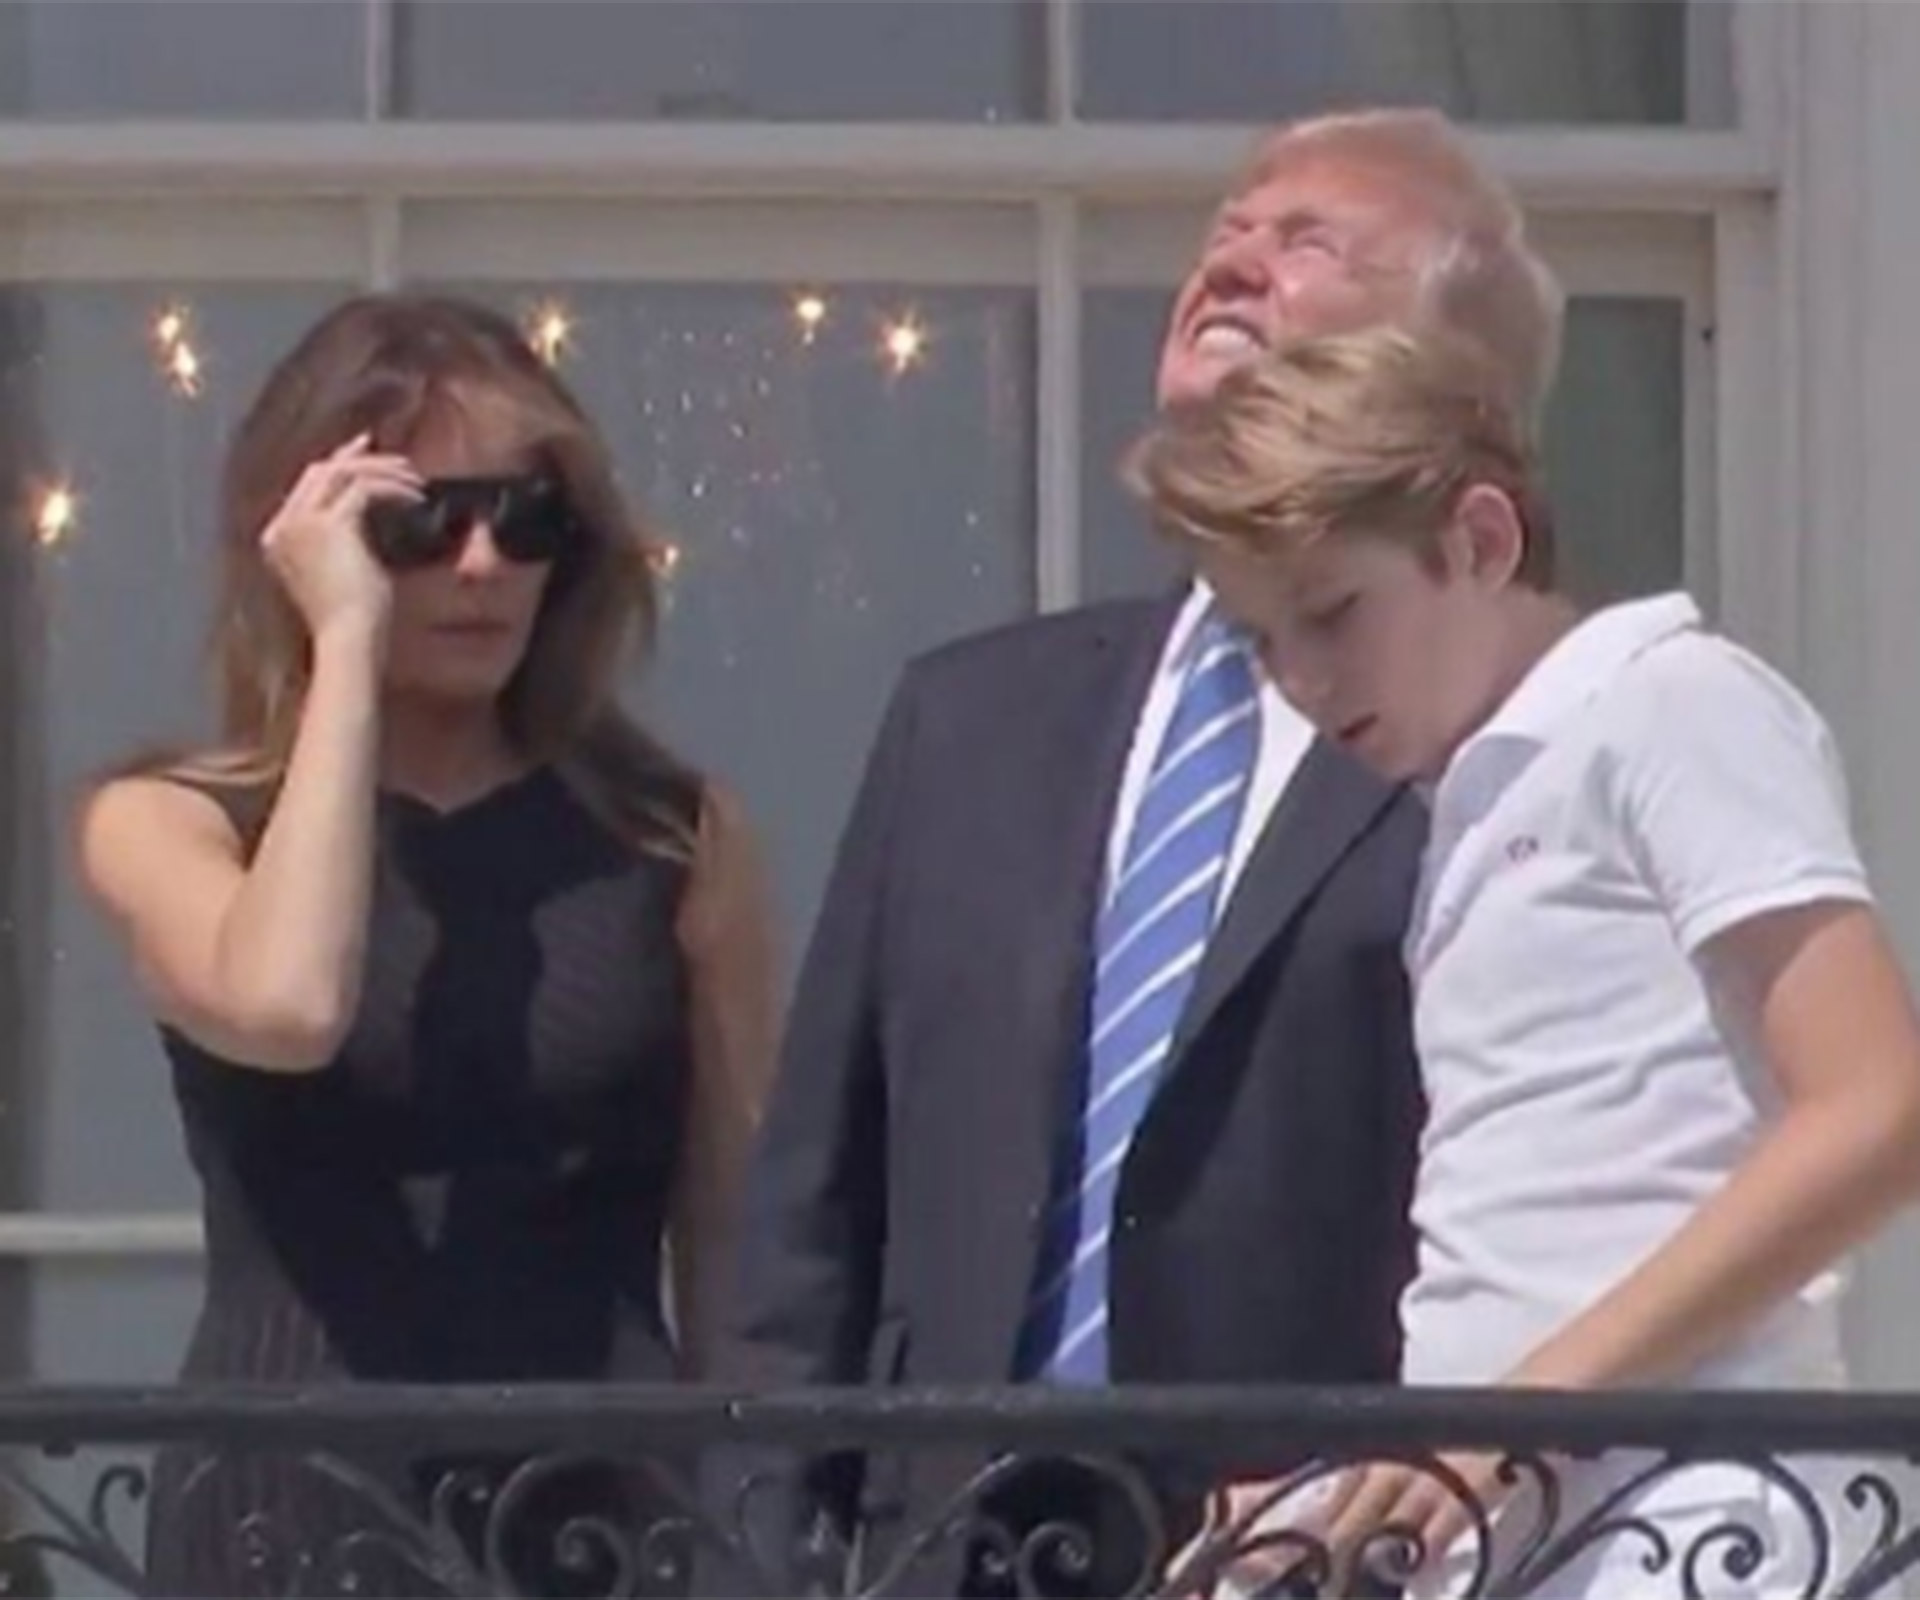 Donald Trump looks directly at the sun during the eclipse and we're just like WTF?